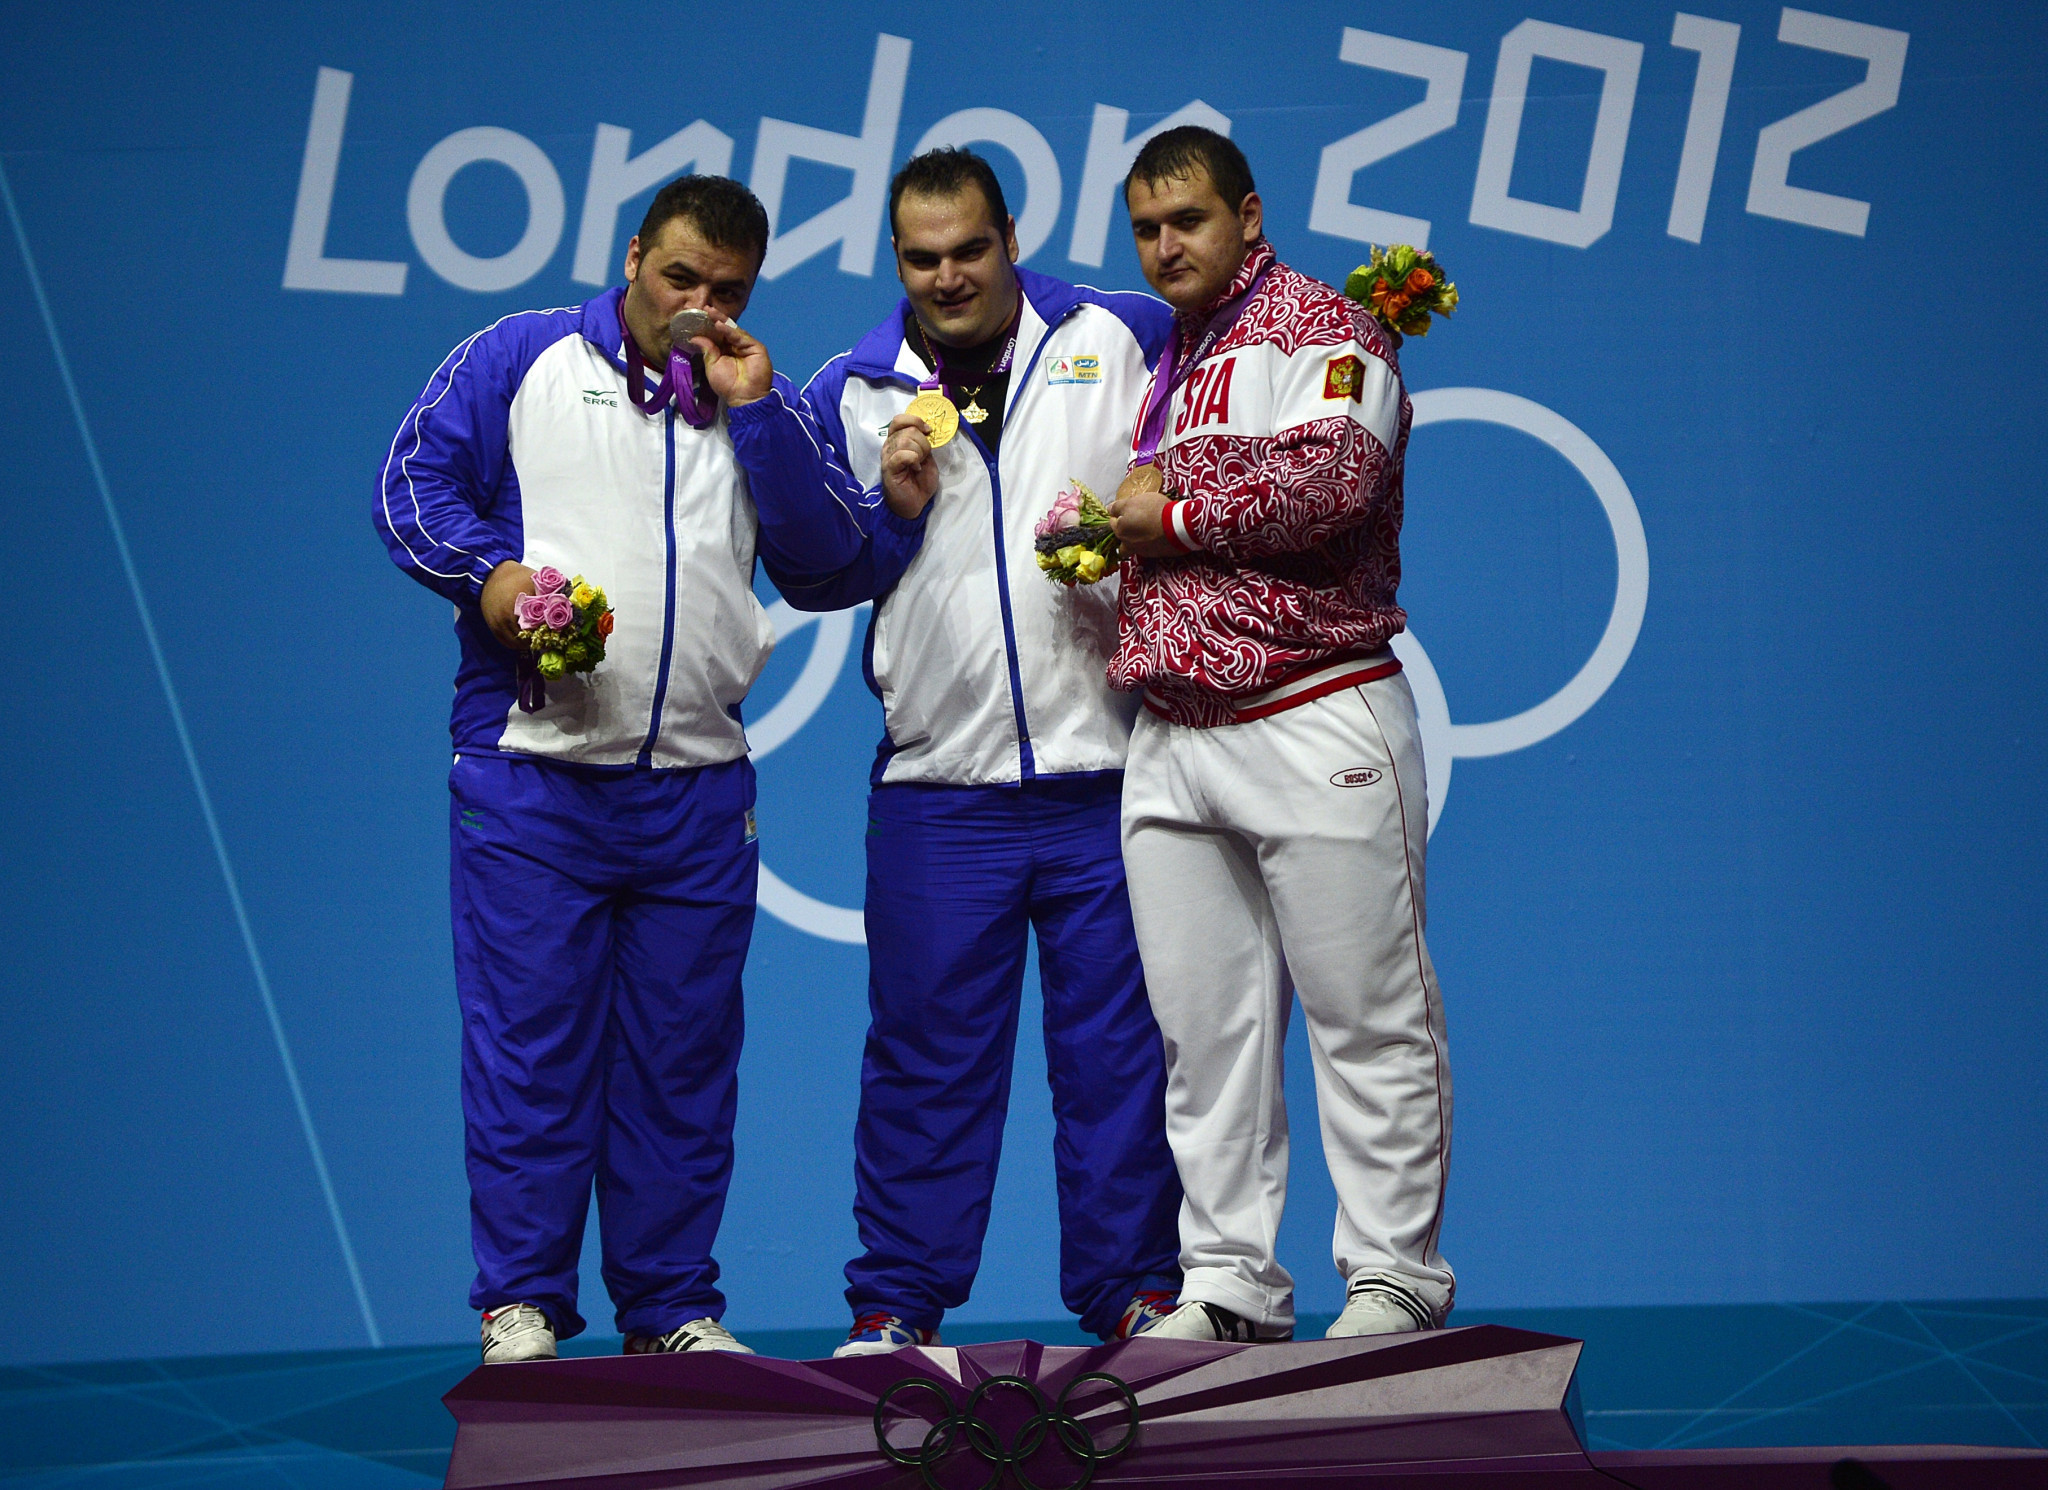 Ruslan Albegov, right, won a bronze medal at London 2012 ©Getty Images